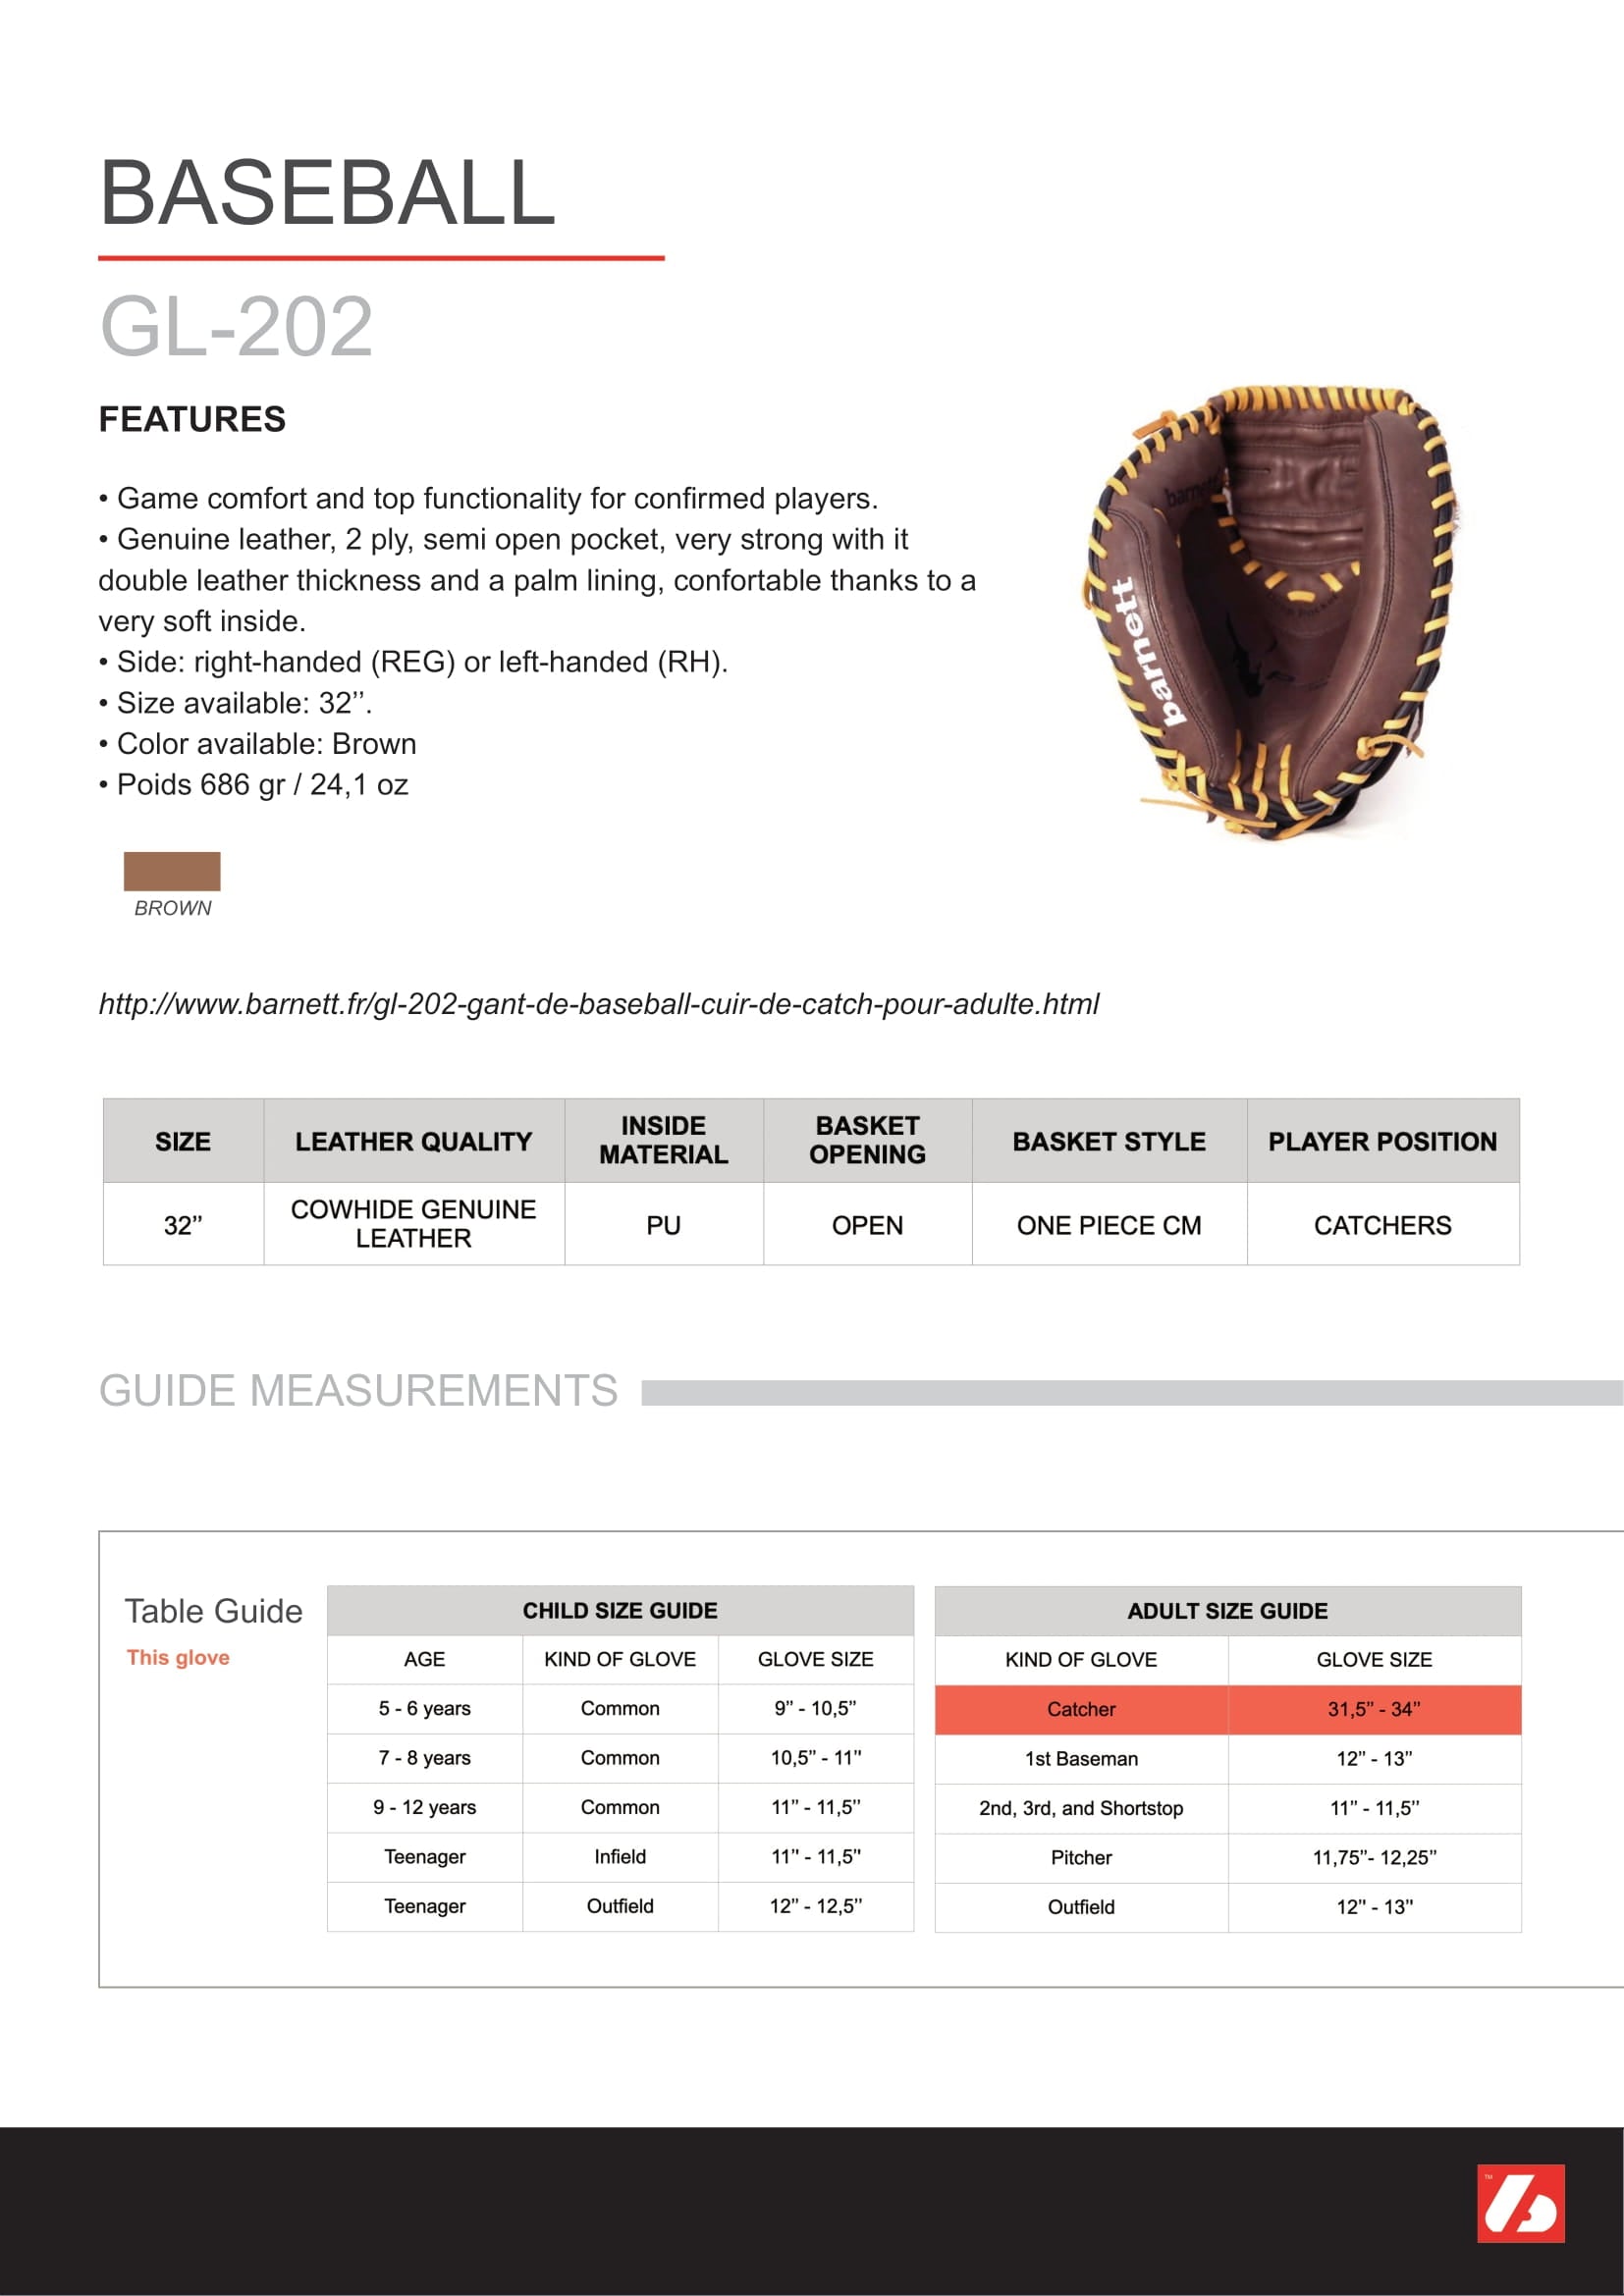 The 10 best baseball gloves: Infield, outfield, catcher, & more